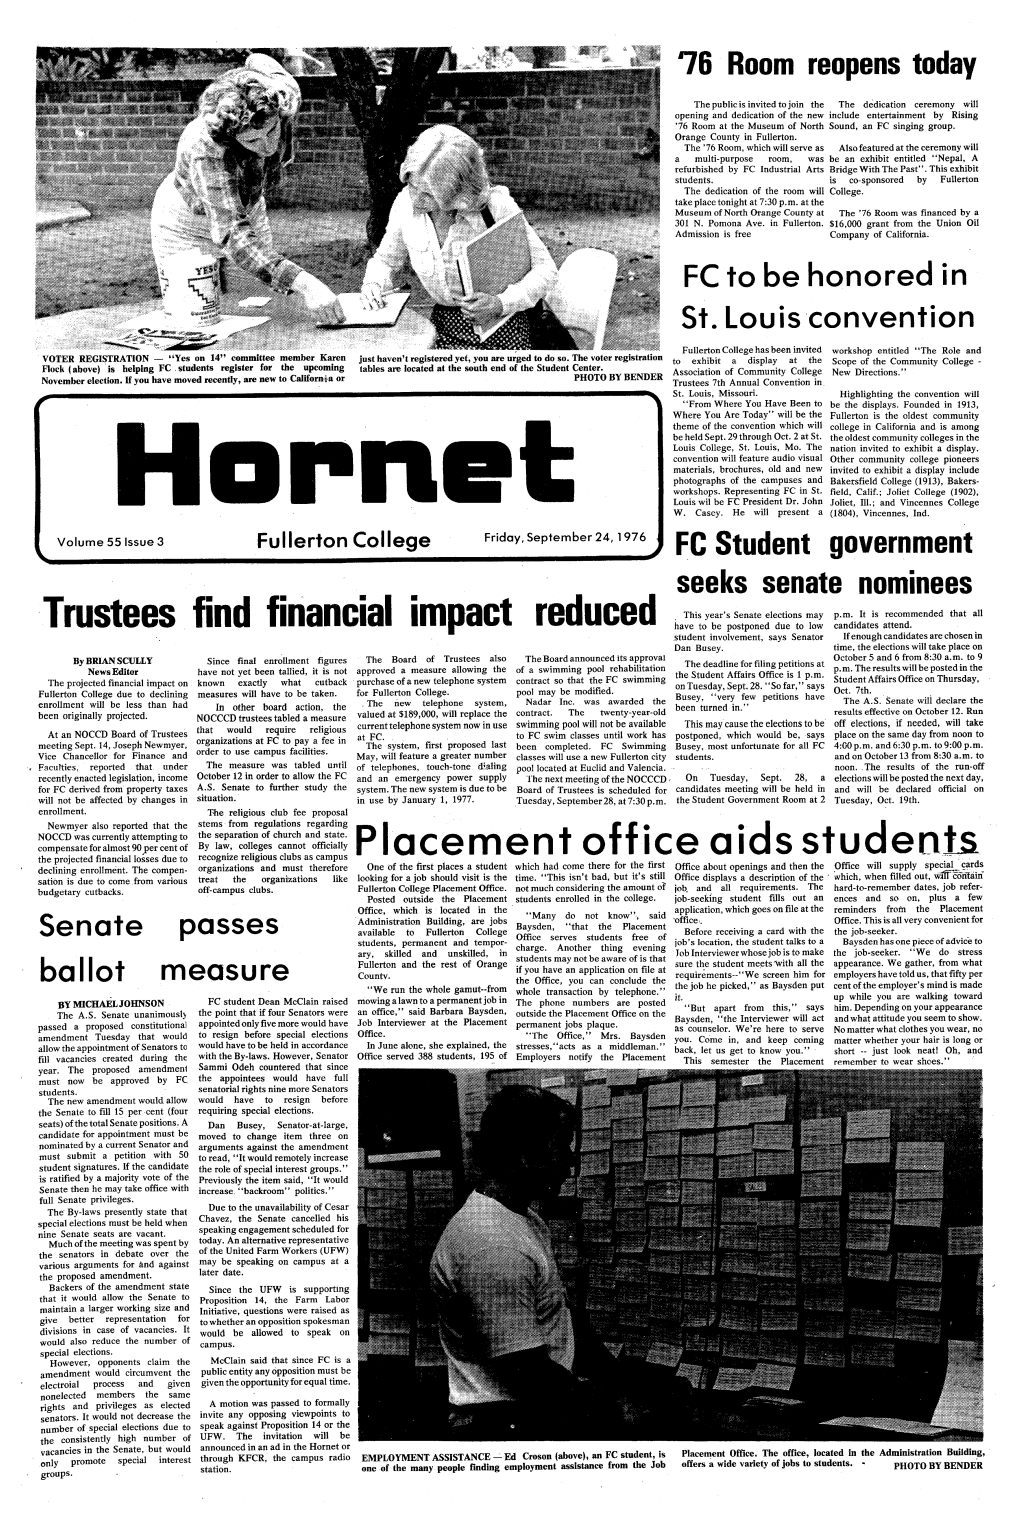 The Hornet, 1923 - 2006 - Link Page Previous Volume 55, Issue 2 Next Volume 55, Issue 4